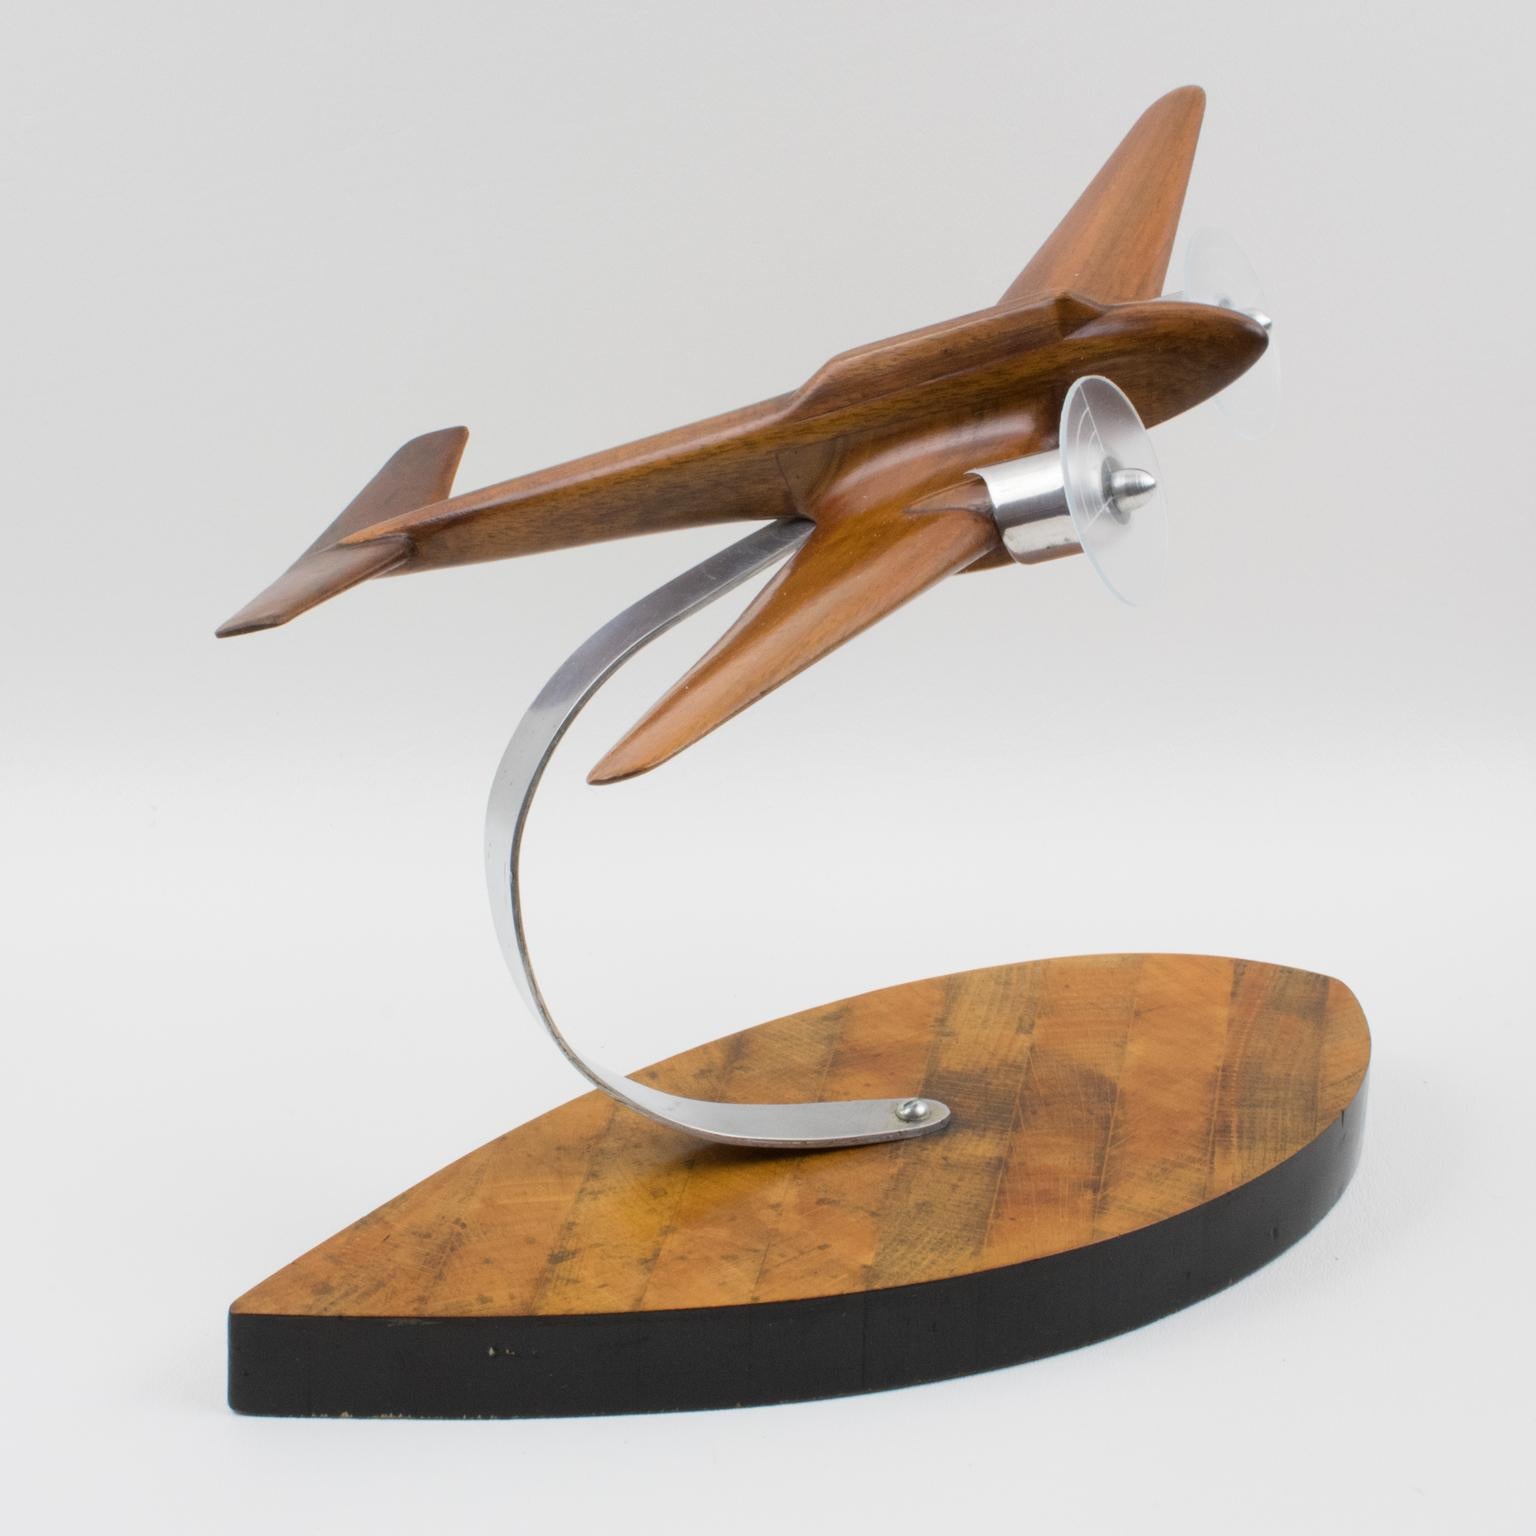 French Art Deco, 1940s Wooden and Aluminum Airplane Aviation Model 2